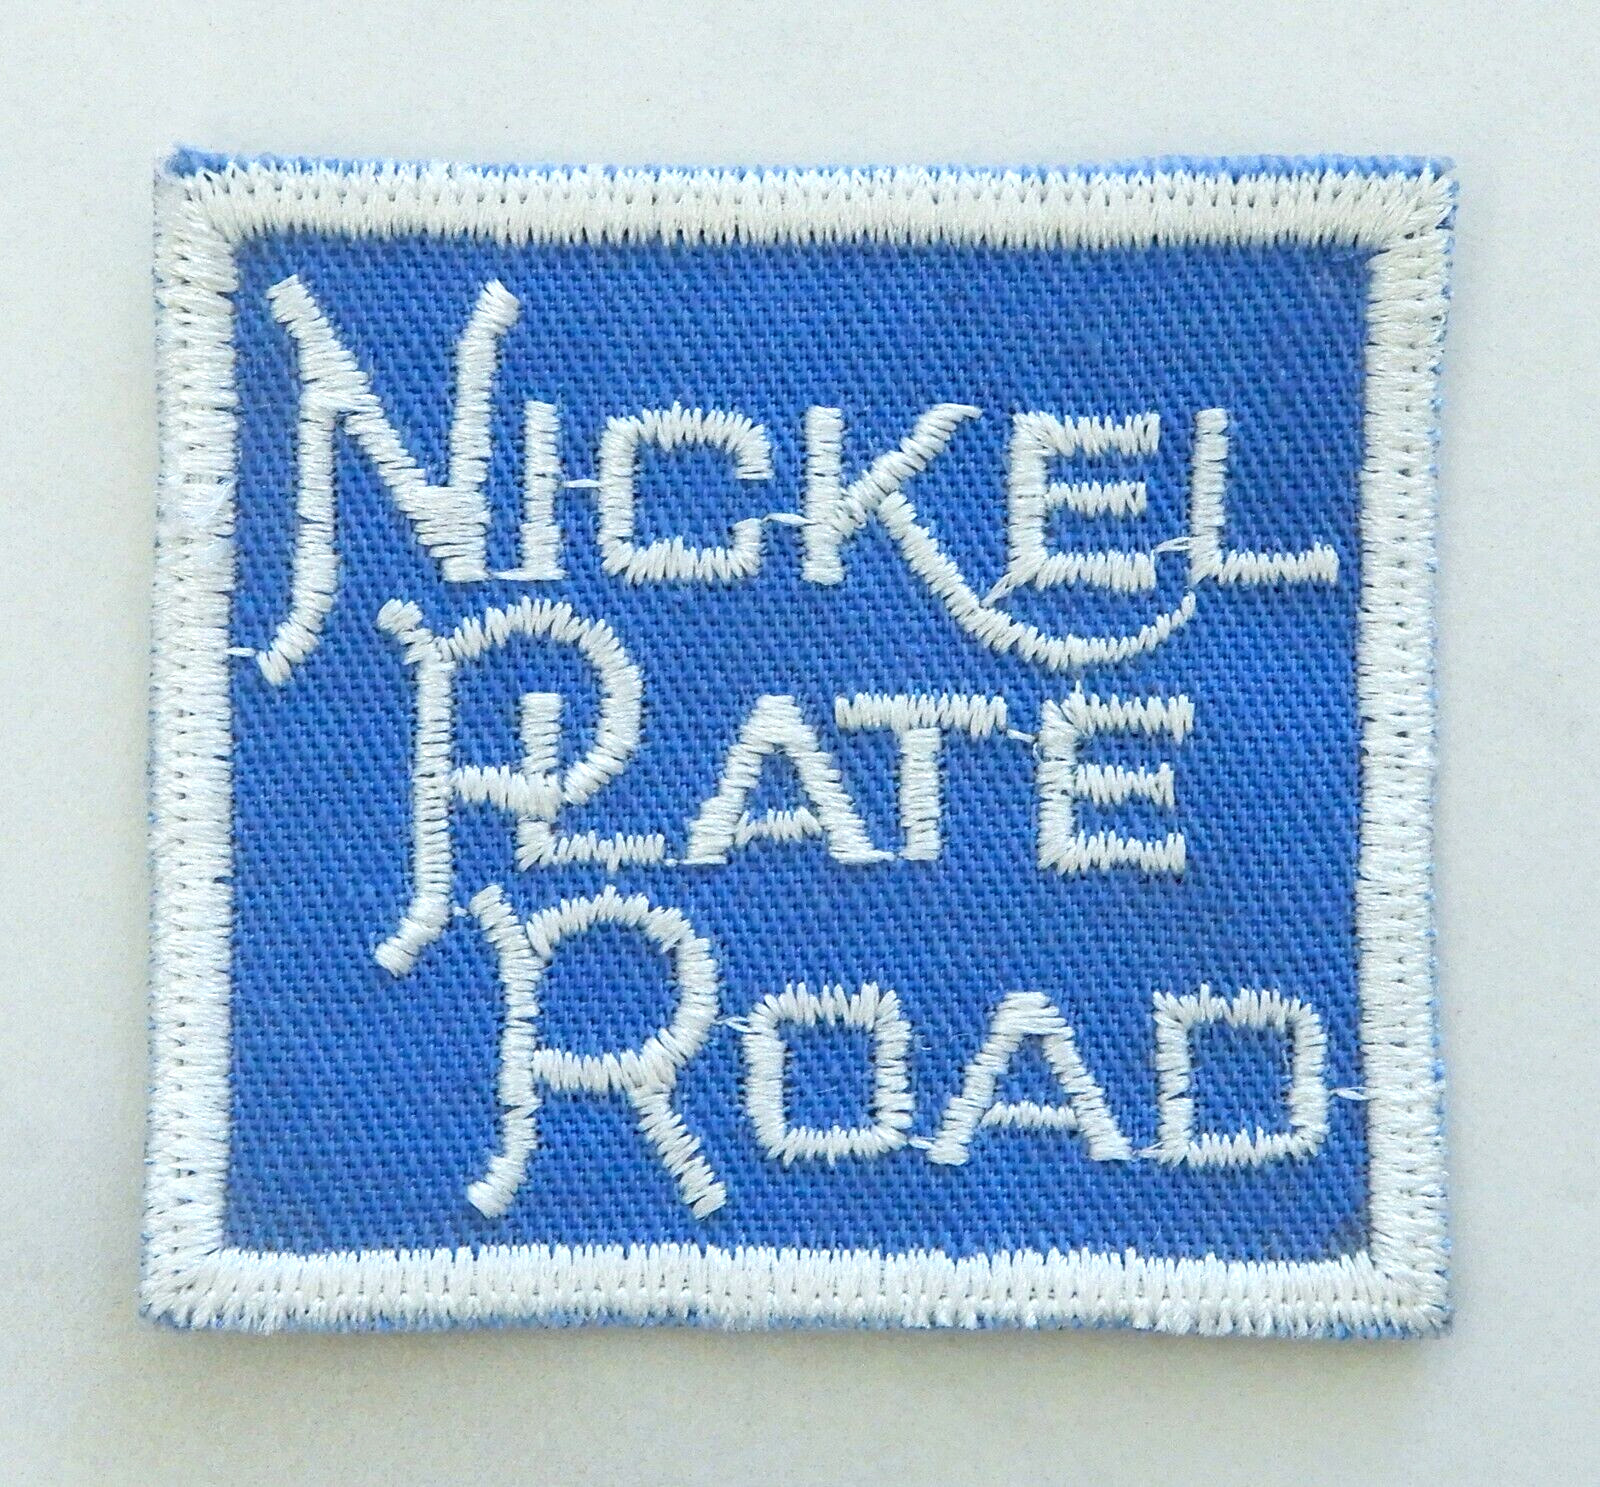 Nickel Plate Road Patch Vintage Railroad Embroidered Blue White Square Sew On